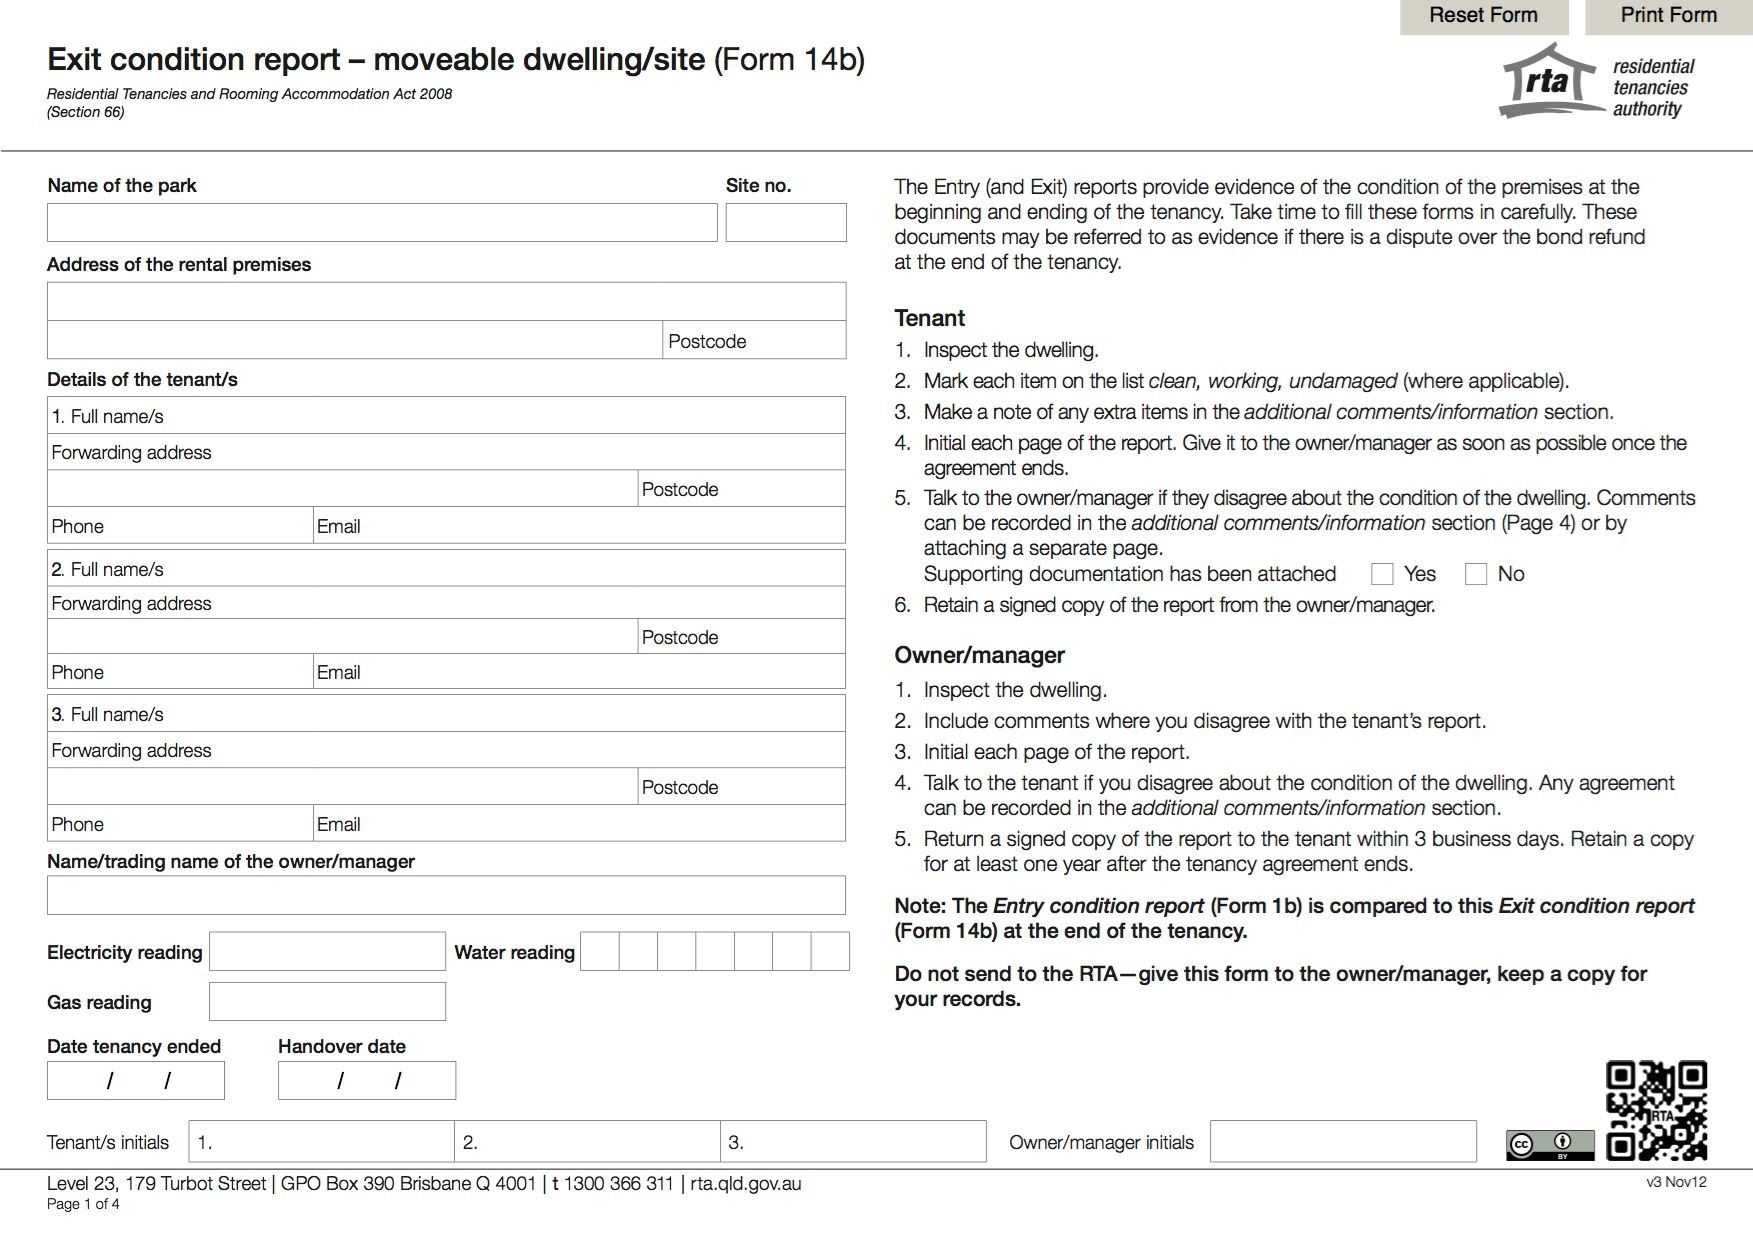 Incident Report Form Template Qld ] – Michael Smith News 17 Inside Incident Report Form Template Qld